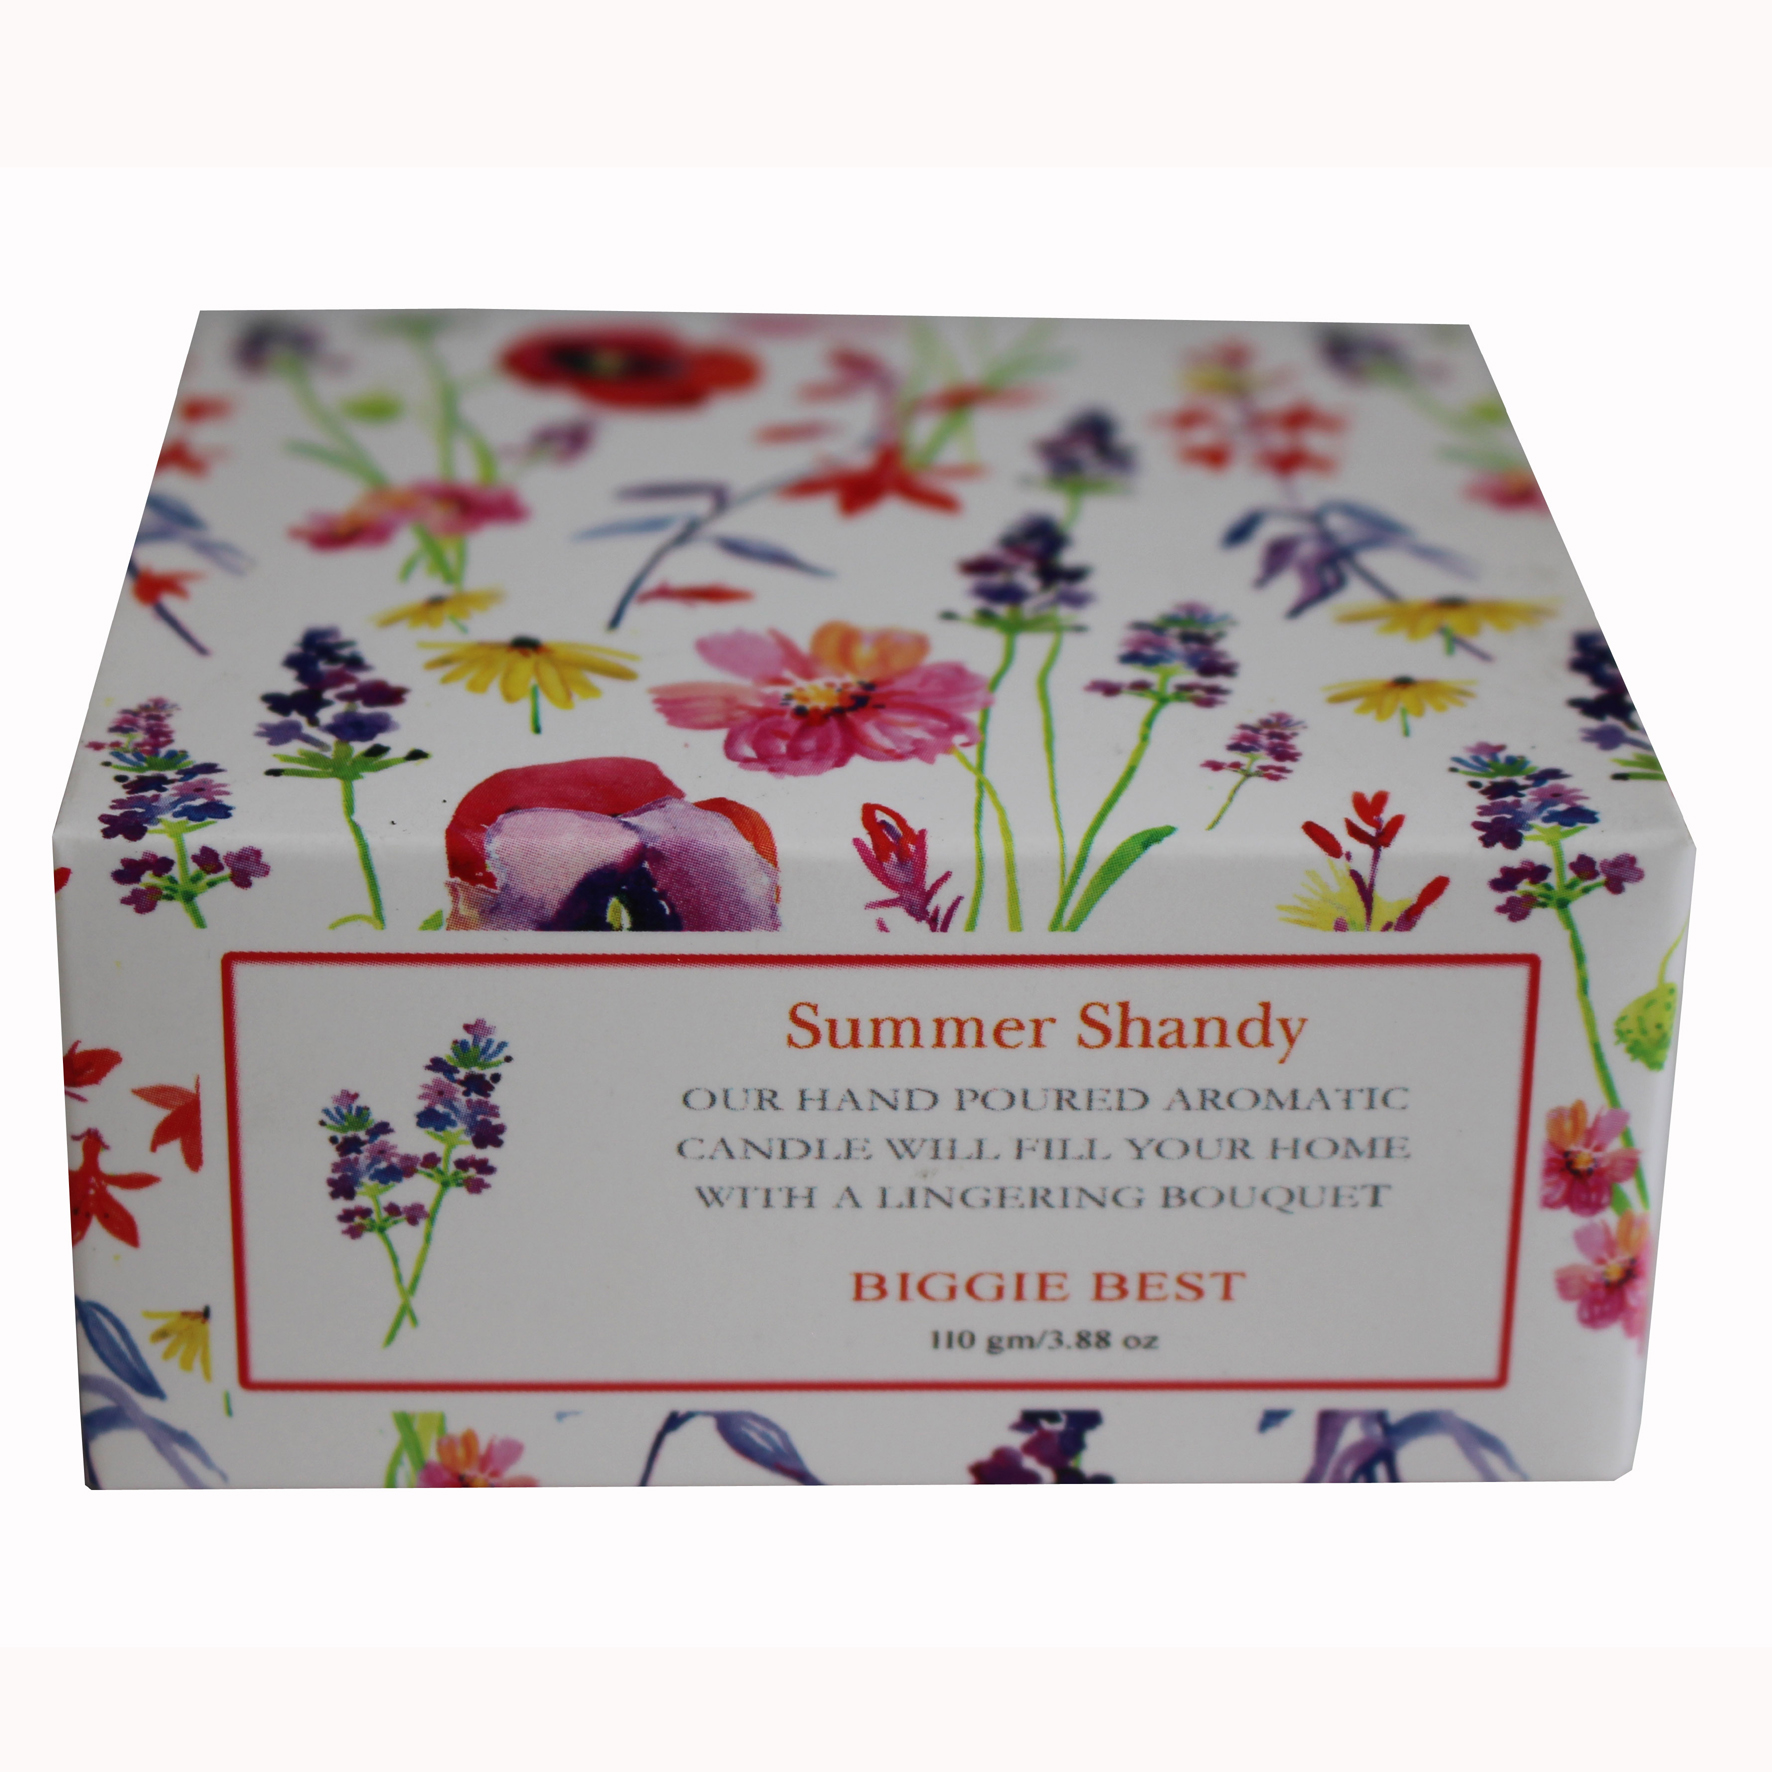 TIN SUMMER SHANDY Scented Candle